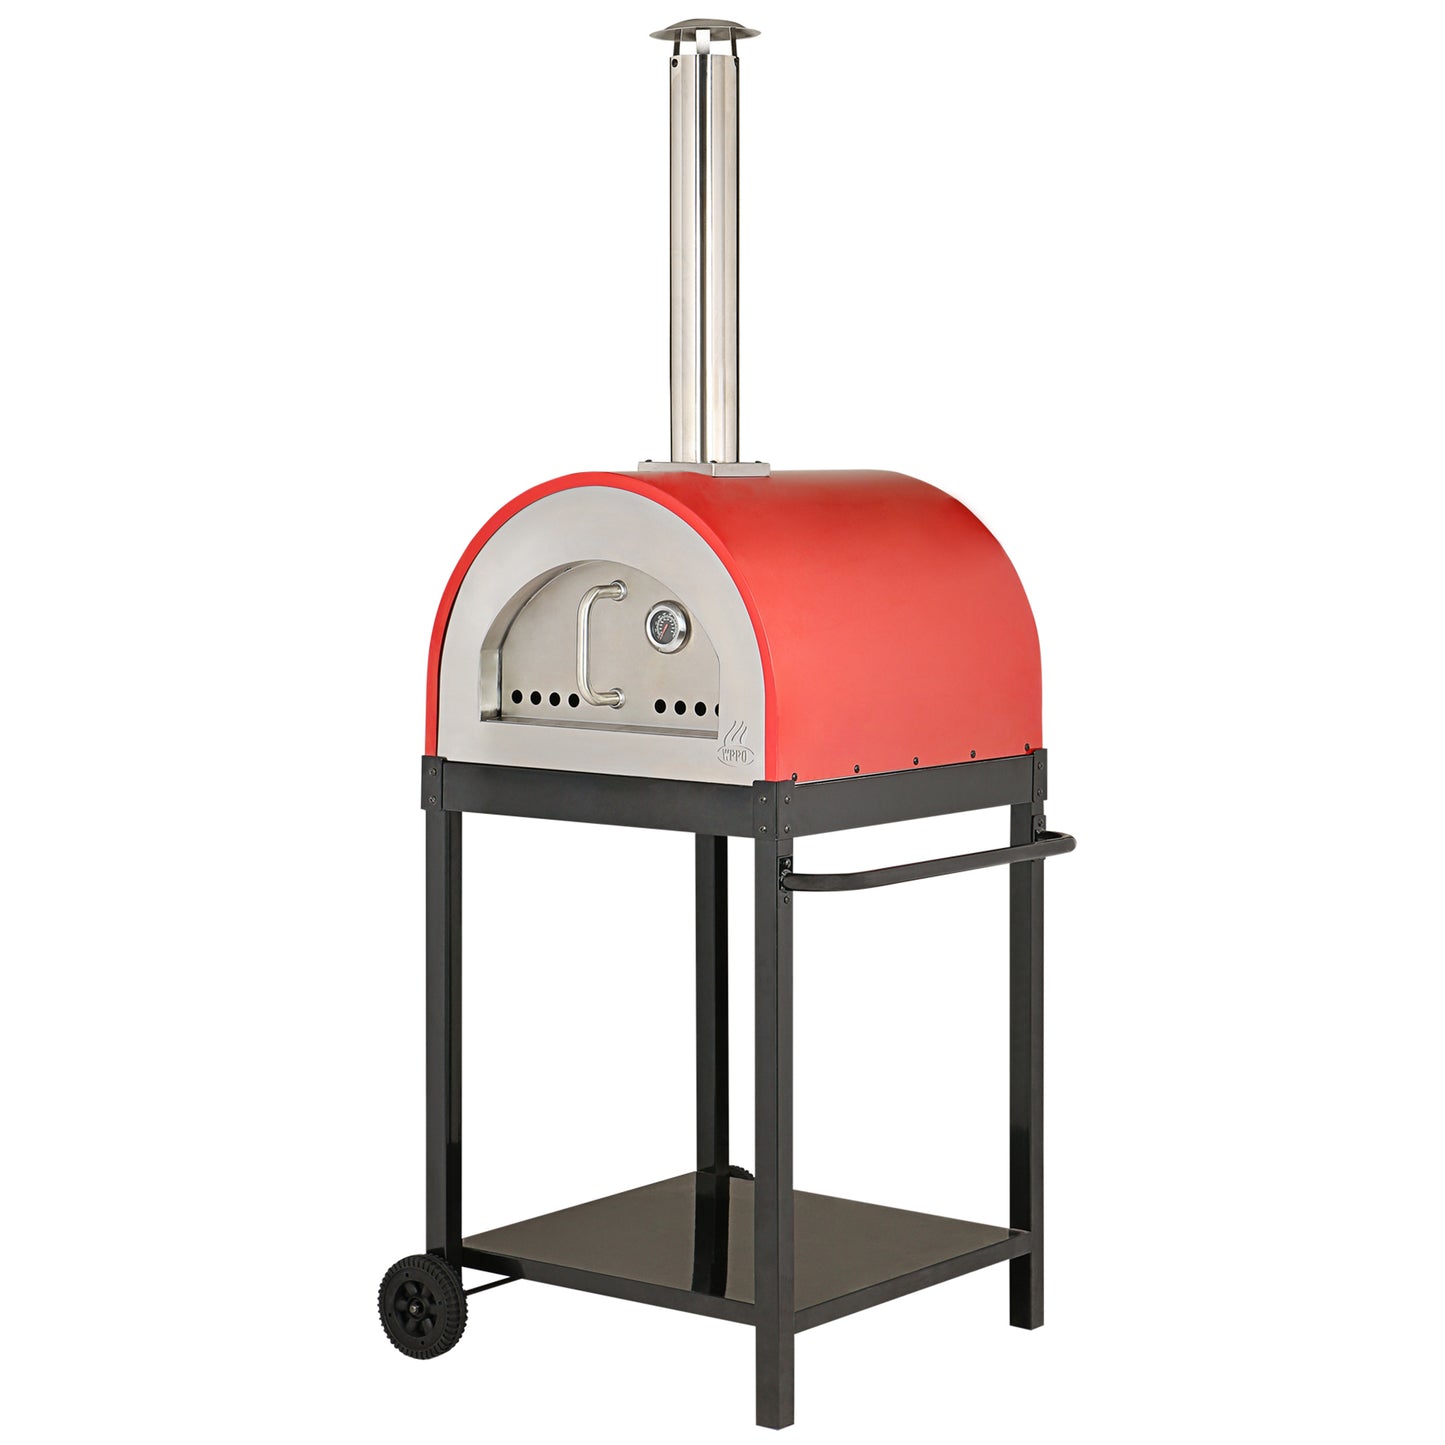 SUPER SALE! 39% OFF! Gas-Ready Traditional 25" Pizza Oven